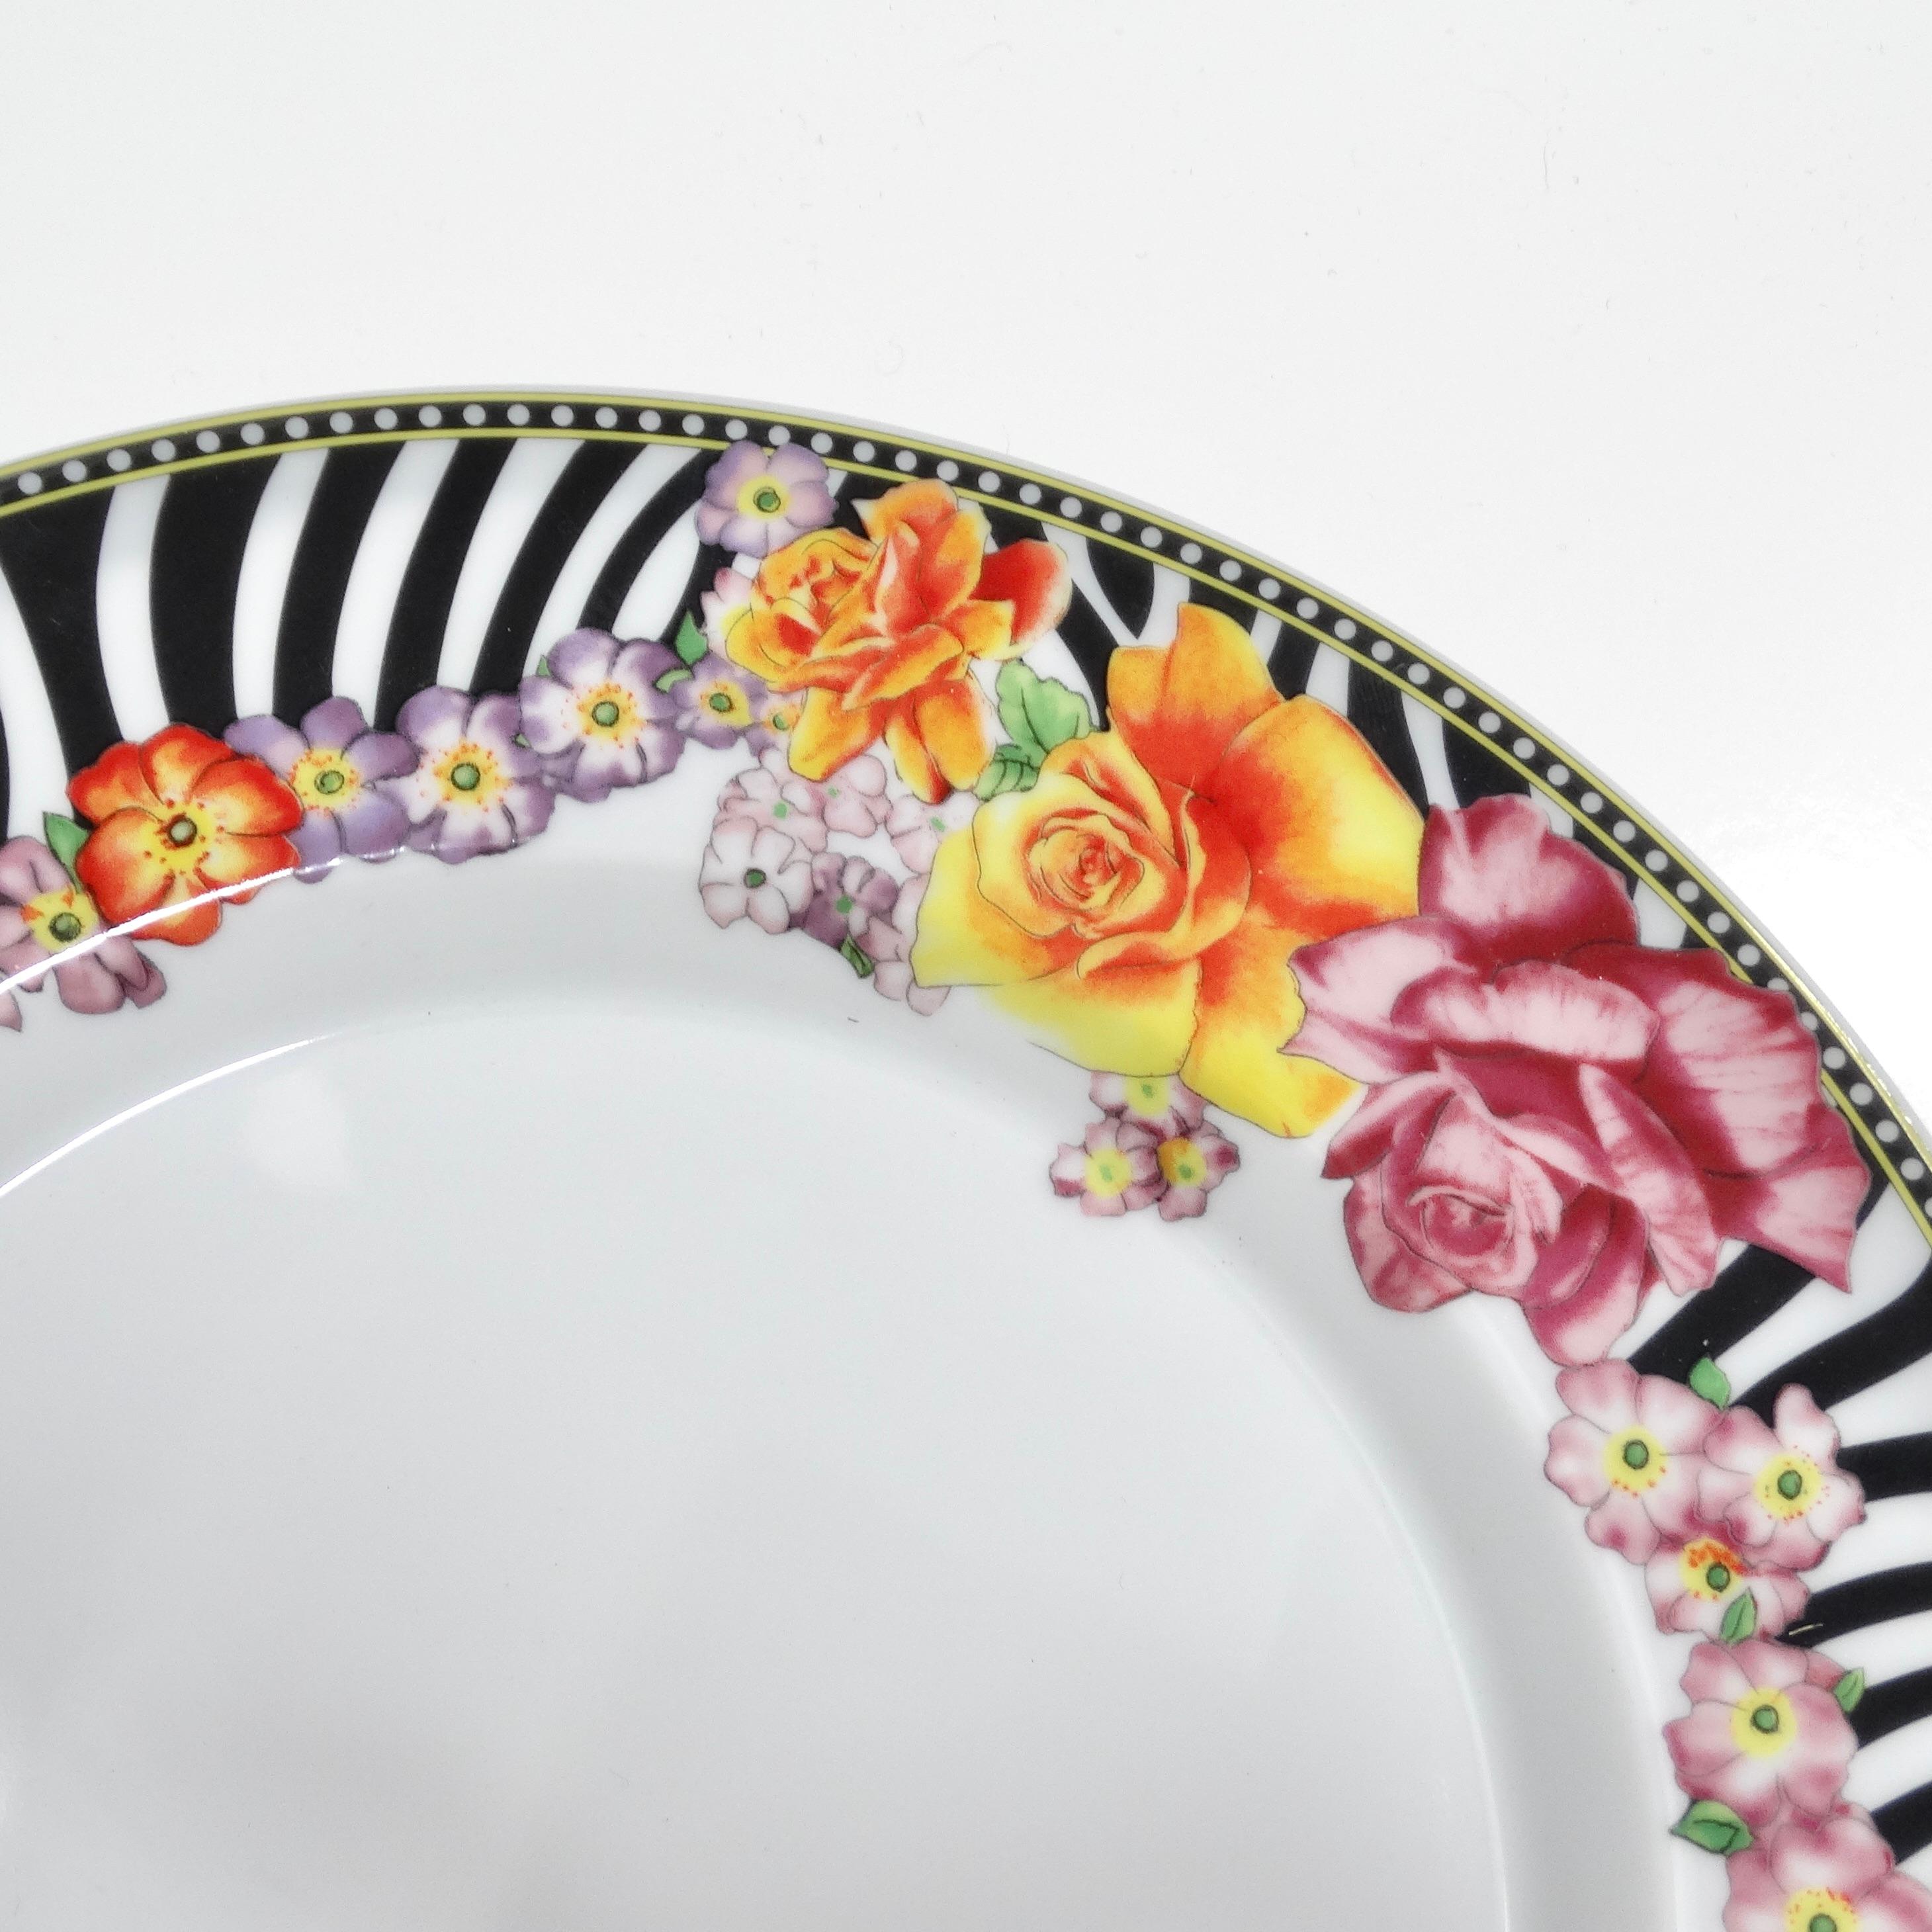 Elevate your dining experience with the Versace Rosenthal 1990s Porcelain Oval Serving Platter, a 14